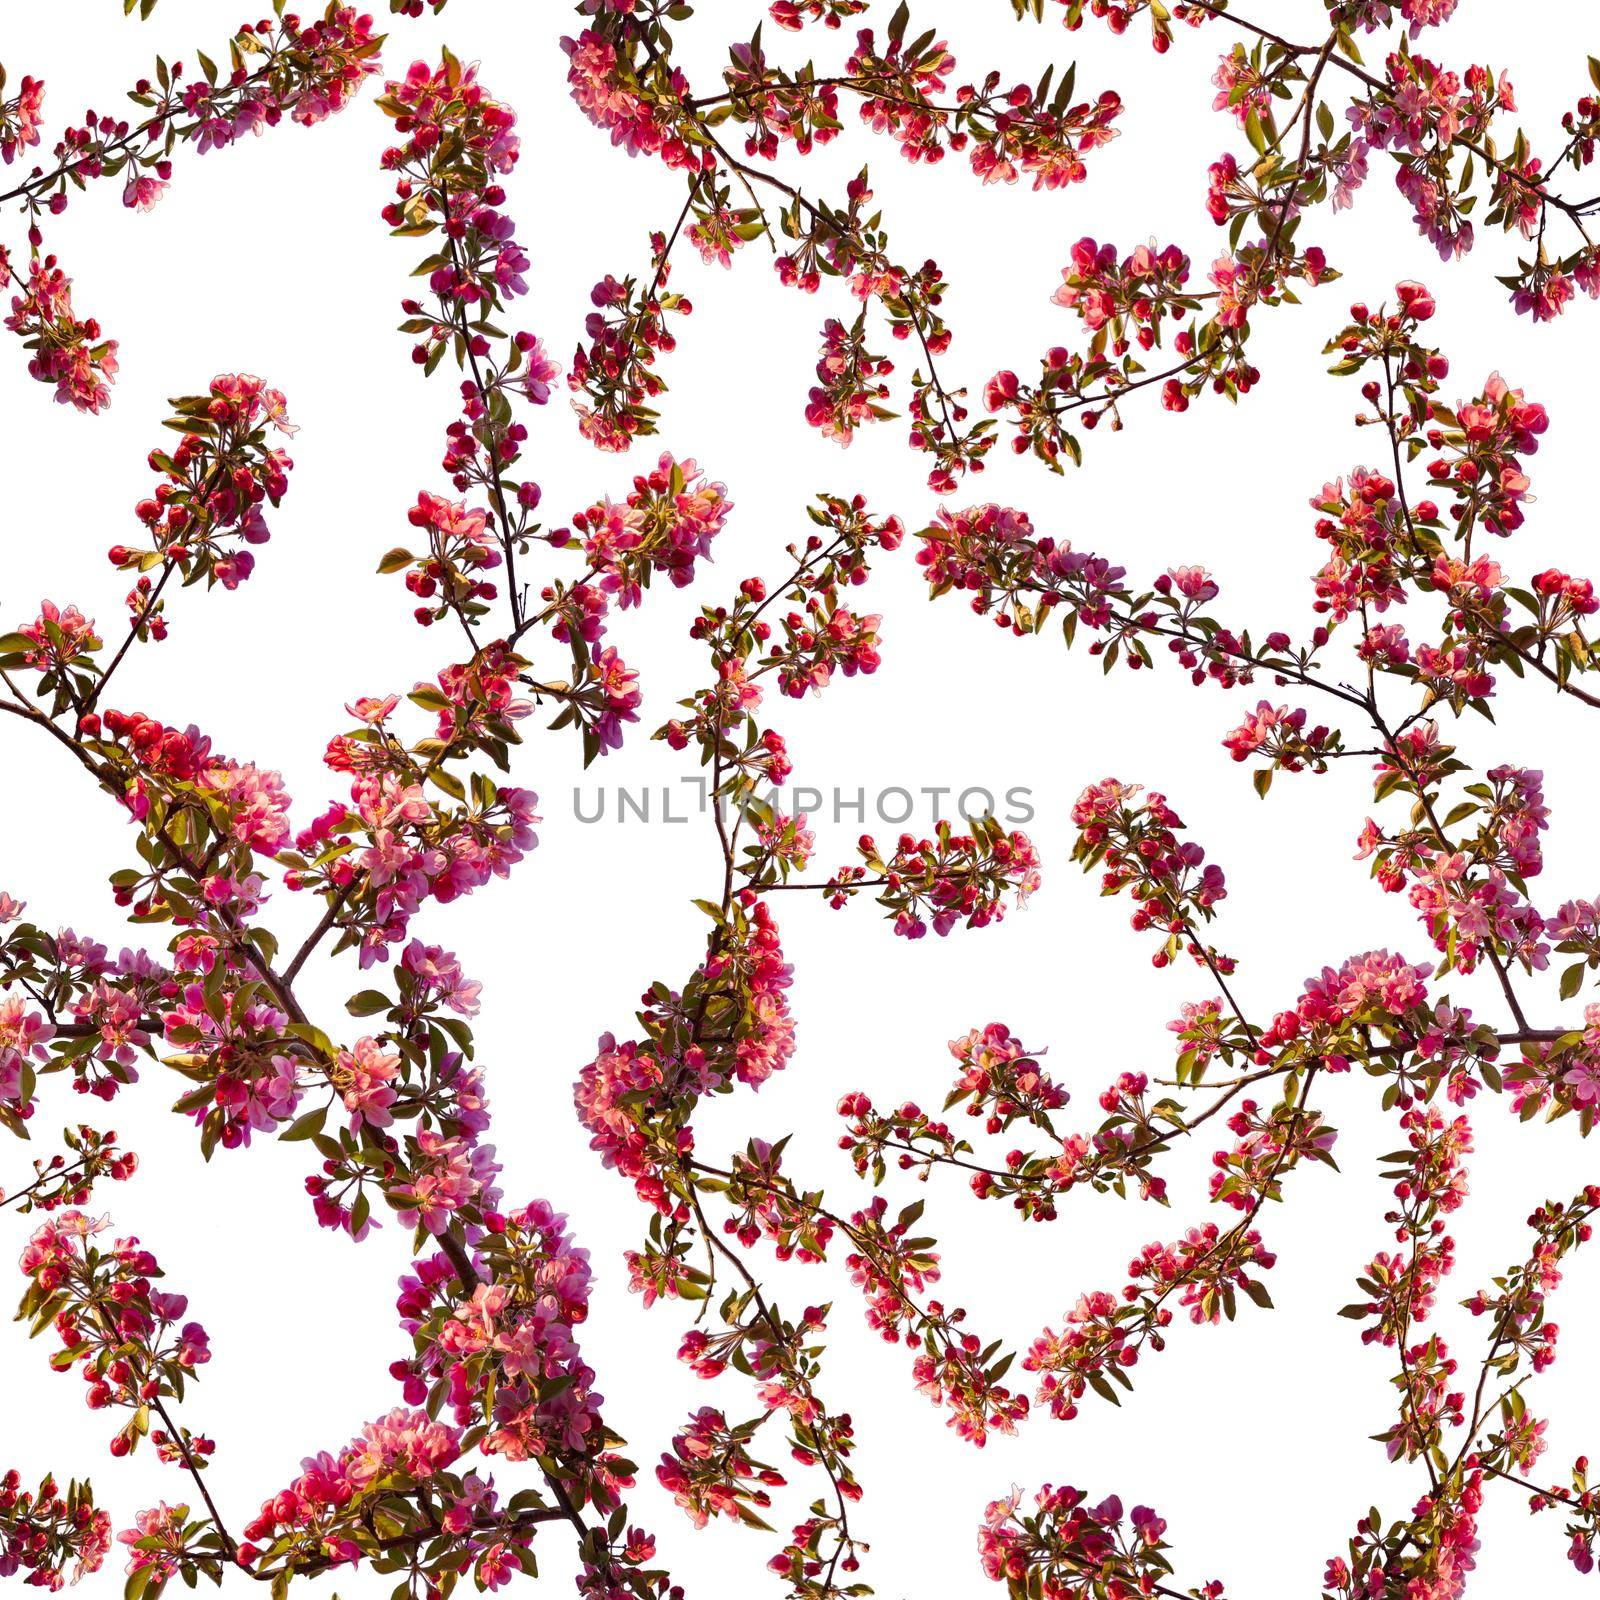 Apple blossom branch of flowers cherry. Traditional ornate spring flowers sakura pattern seamless. White flower buds on a tree. Sacura collage artistic illustration. by Andre1ns